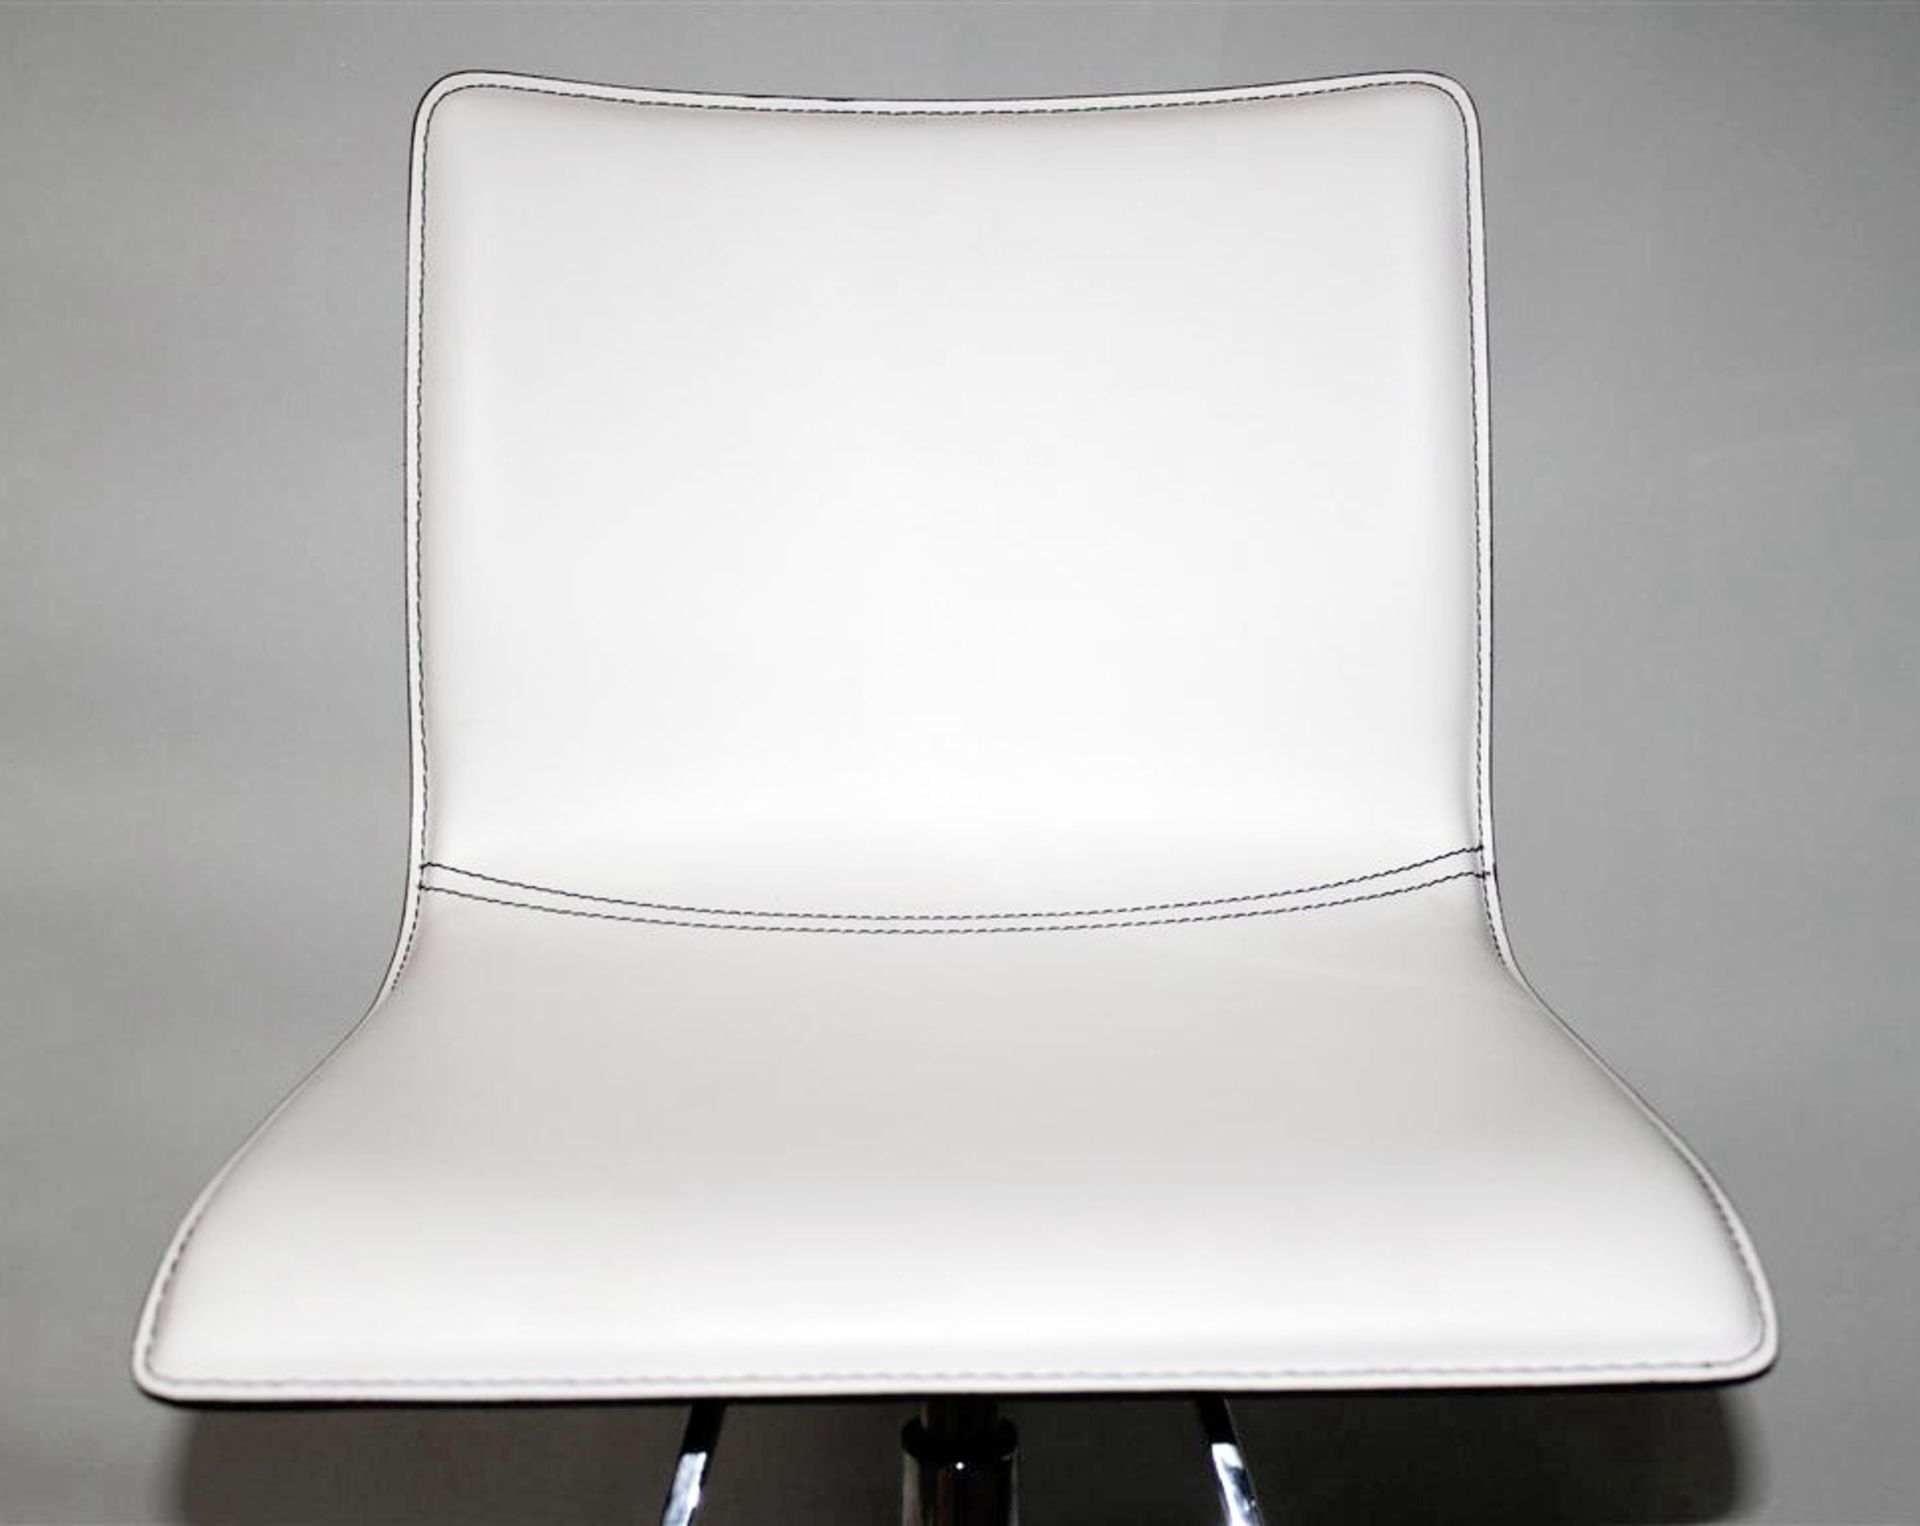 1 x CATTELAN "Toto" Stool - White With Black Stitching  - Made In Italy - Ref: 3352787 - CL087 - - Image 5 of 9